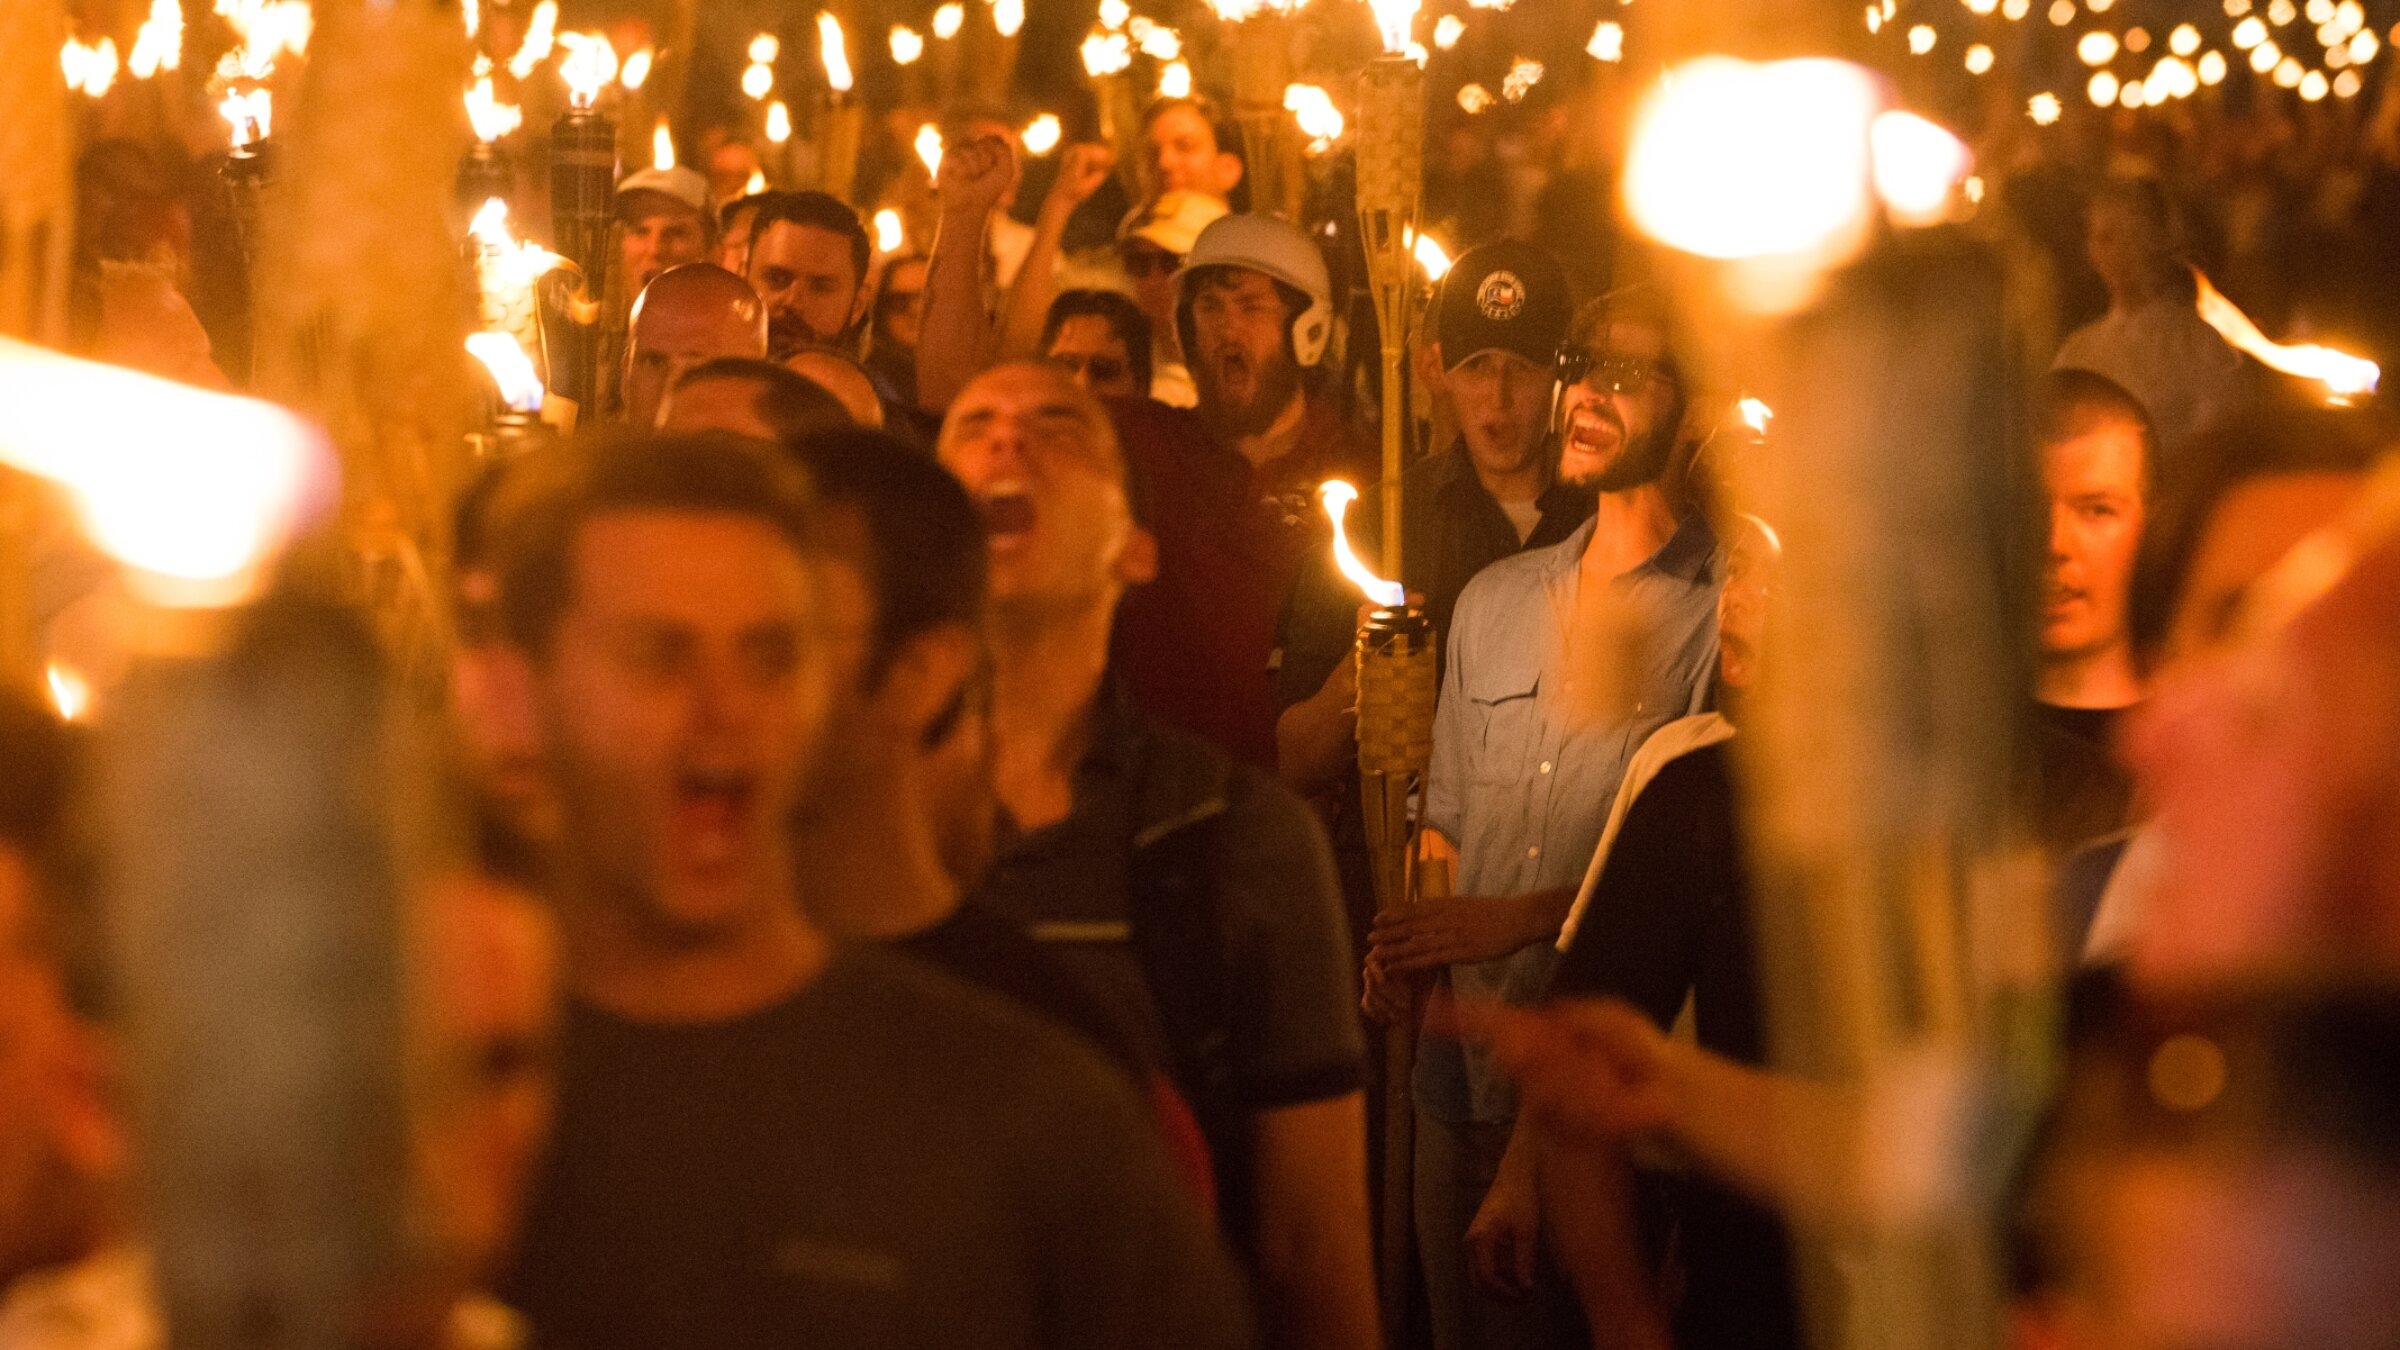 Neo-Nazis and white Supremacists take part in a march the night before the Unite the Right rally in Charlottesville, Va., Aug. 11, 2017.